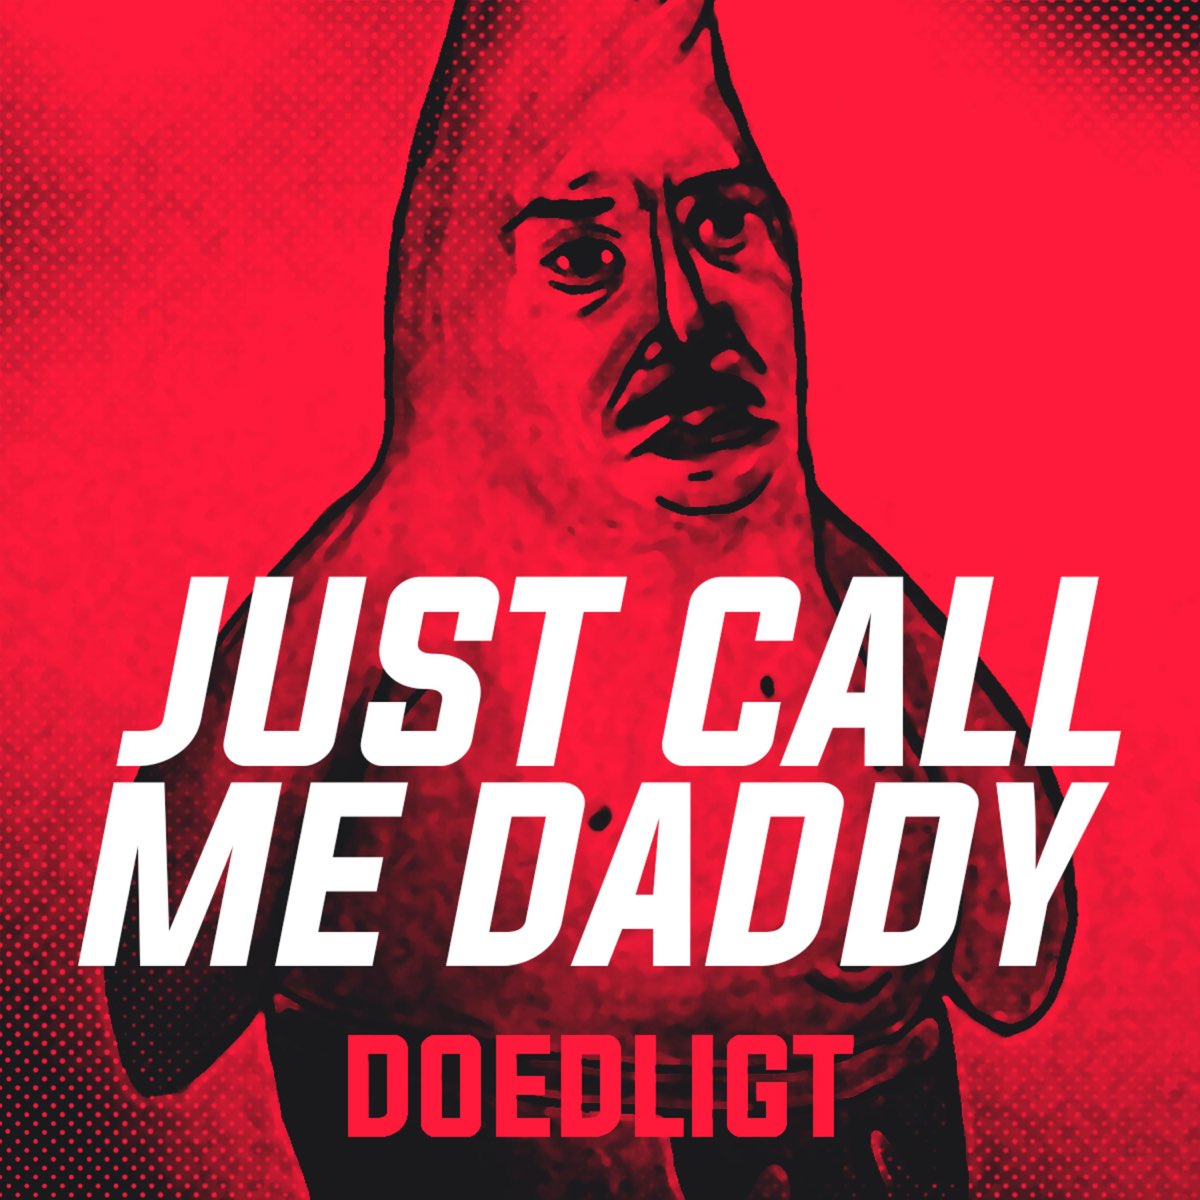 Just call 3. Just Call me. Just Call. Офые сфдд ьу. Call me Daddy.